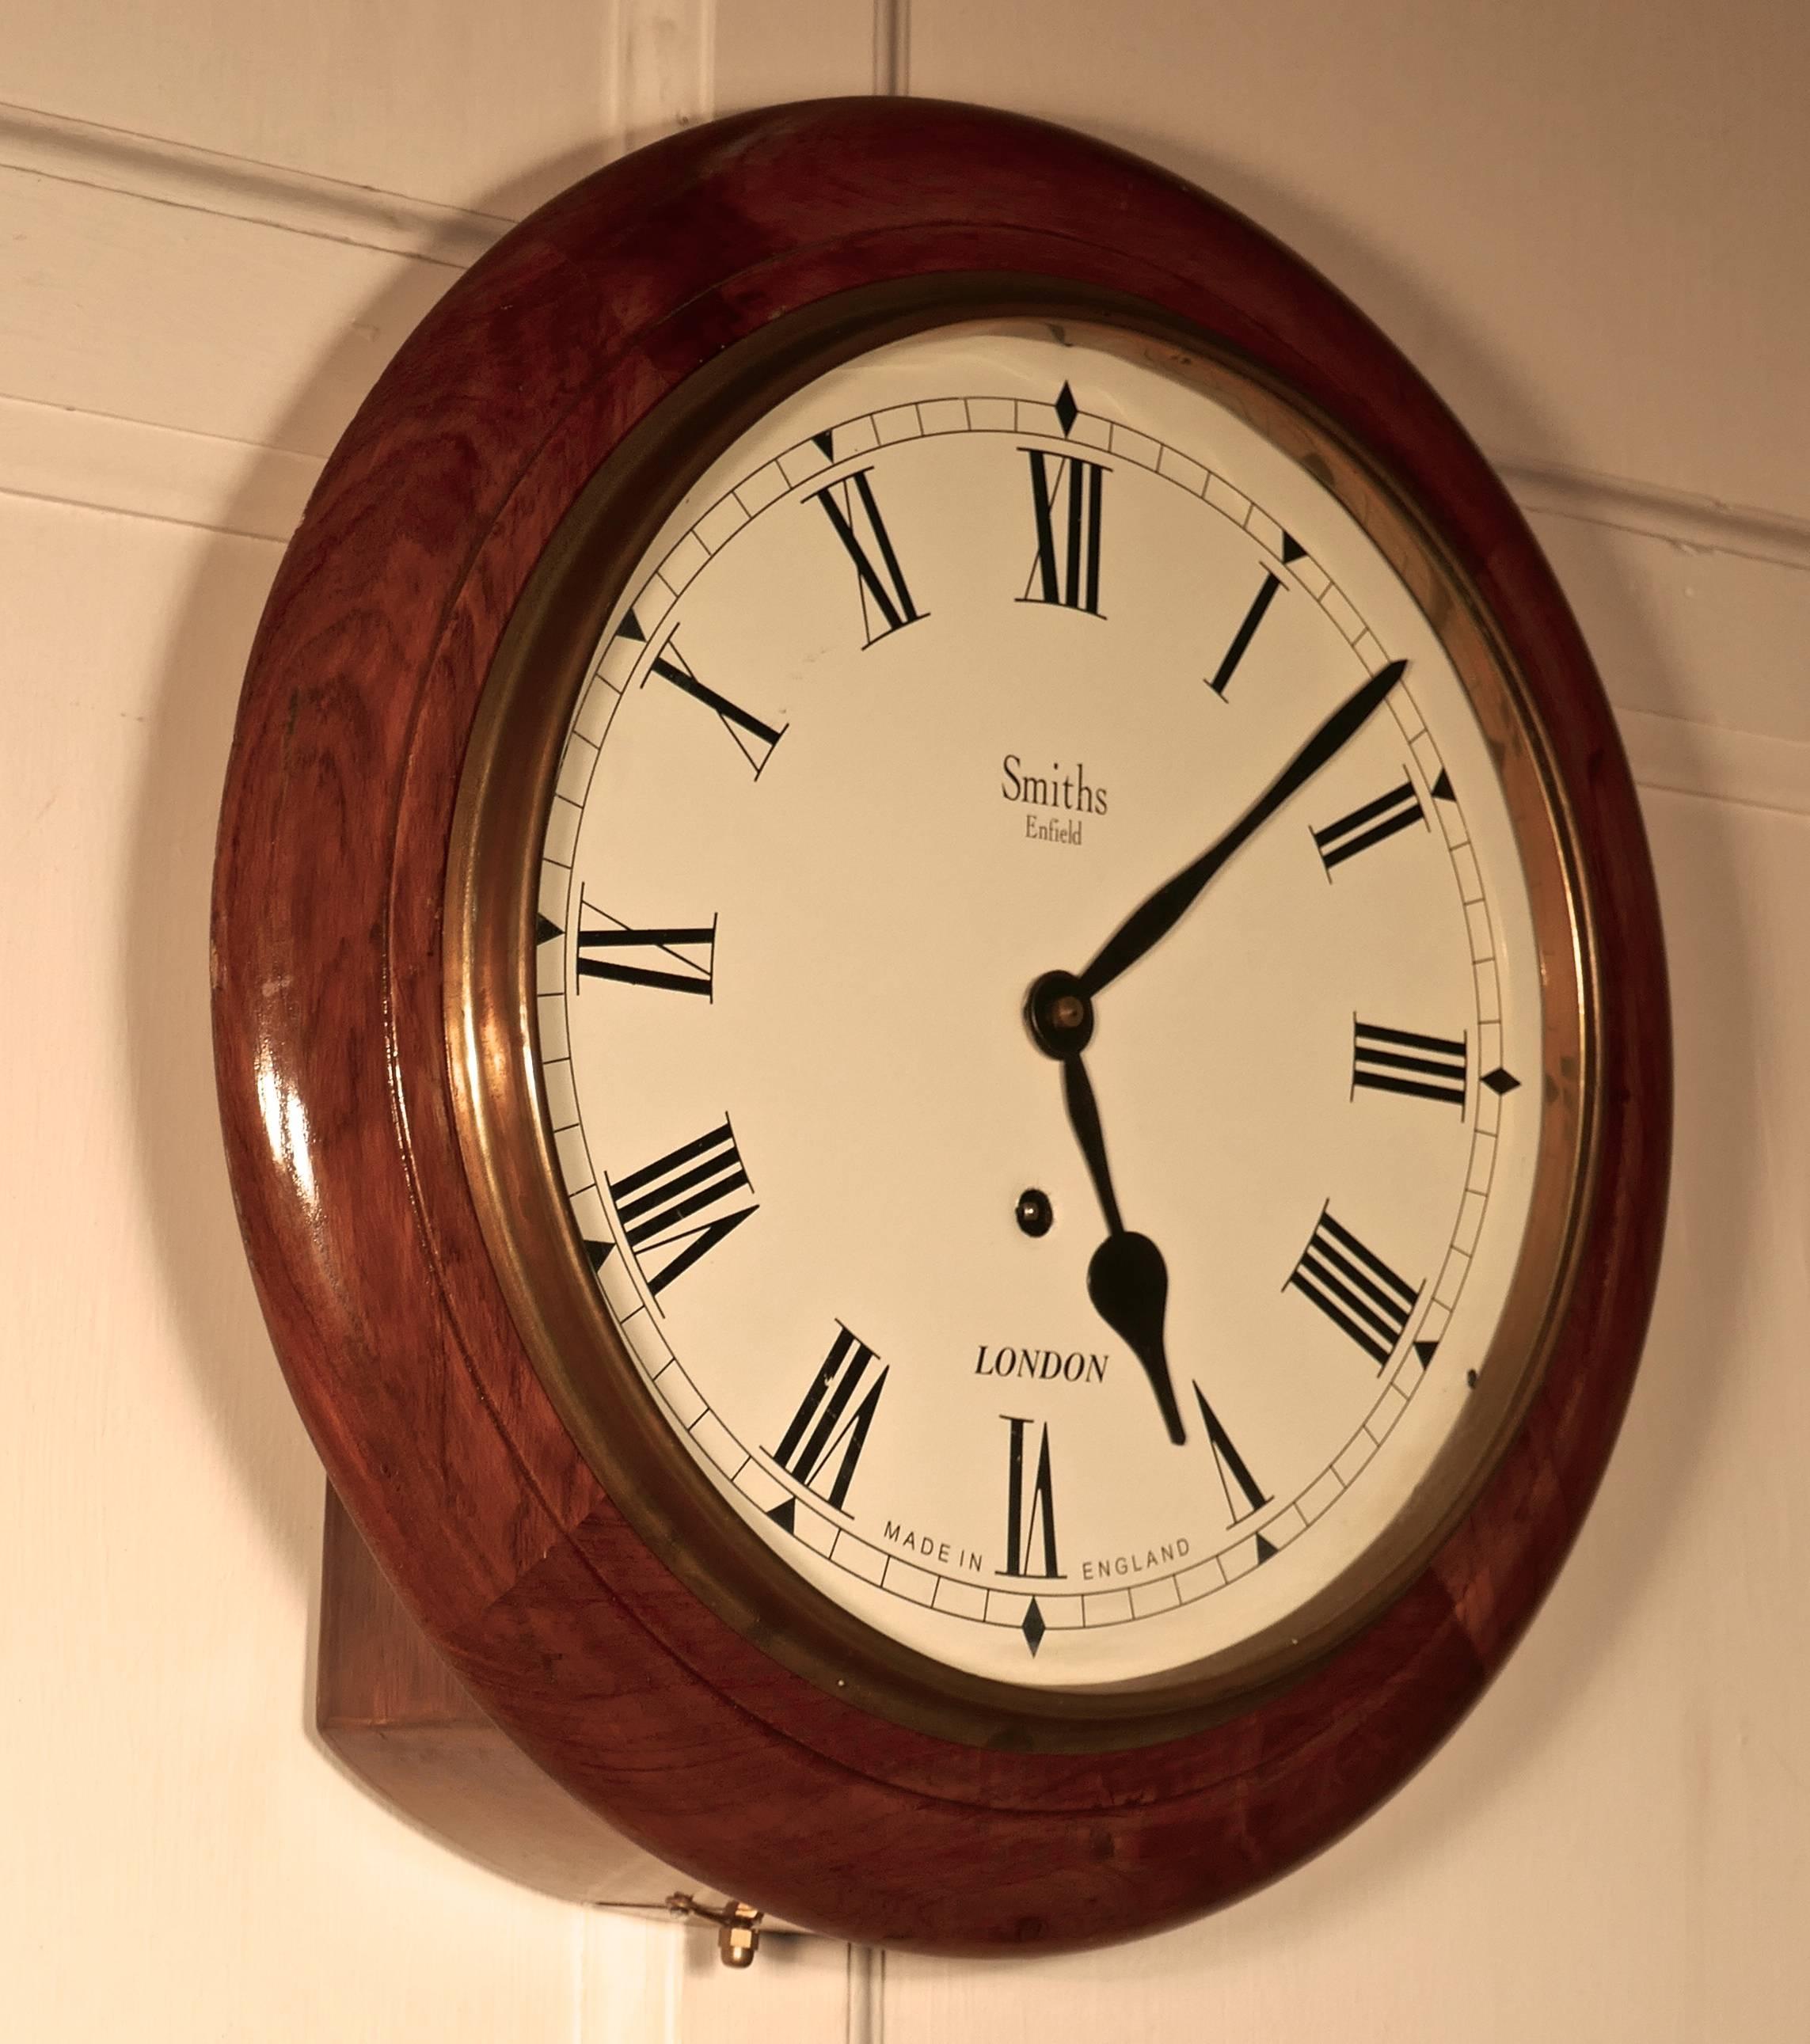 This is a stunning example of an English Traditional School or Railway Clock. Made circa 1910 By Smiths Enfield in London. It has undergone a full service and overhaul so it works as well as the day it was made.
The clock has a painted dial, the